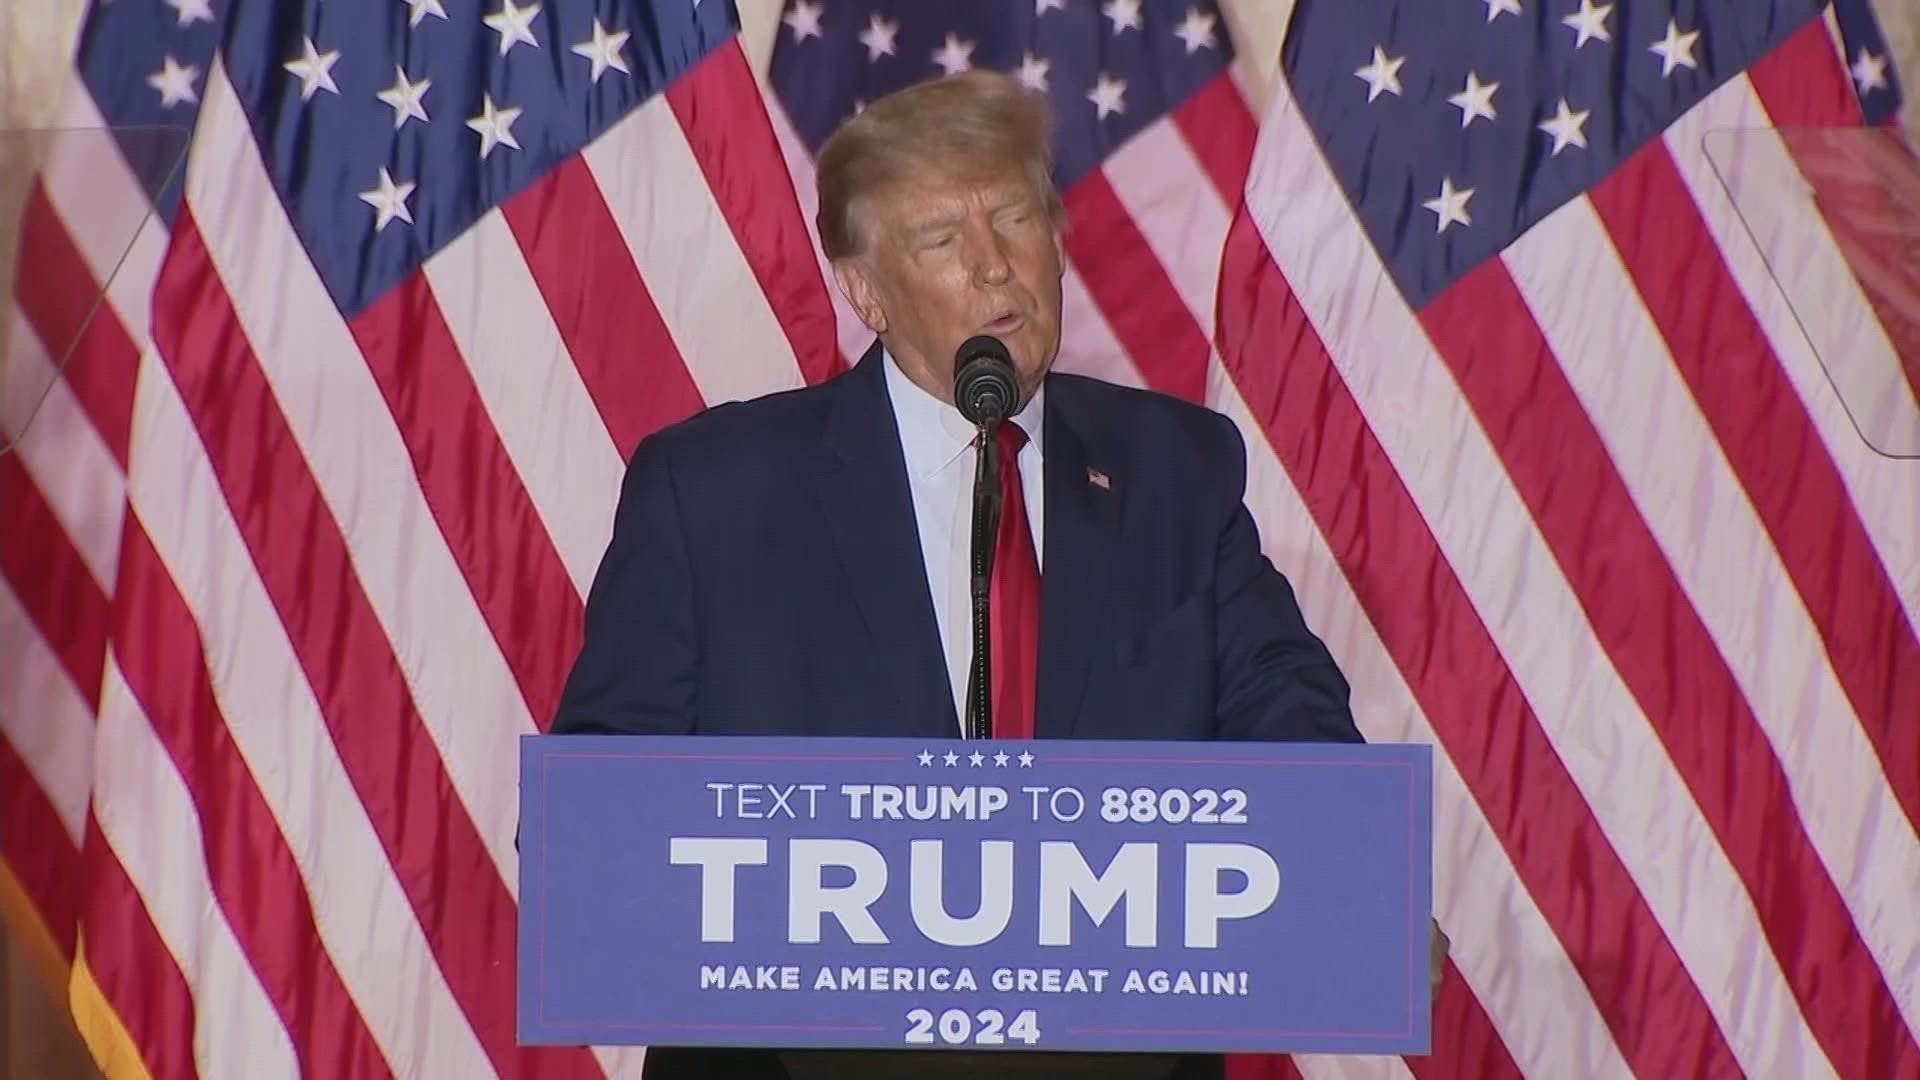 "In order to Make America Great and glorious again, I am tonight announcing my candidacy for President of the United States," said Trump.